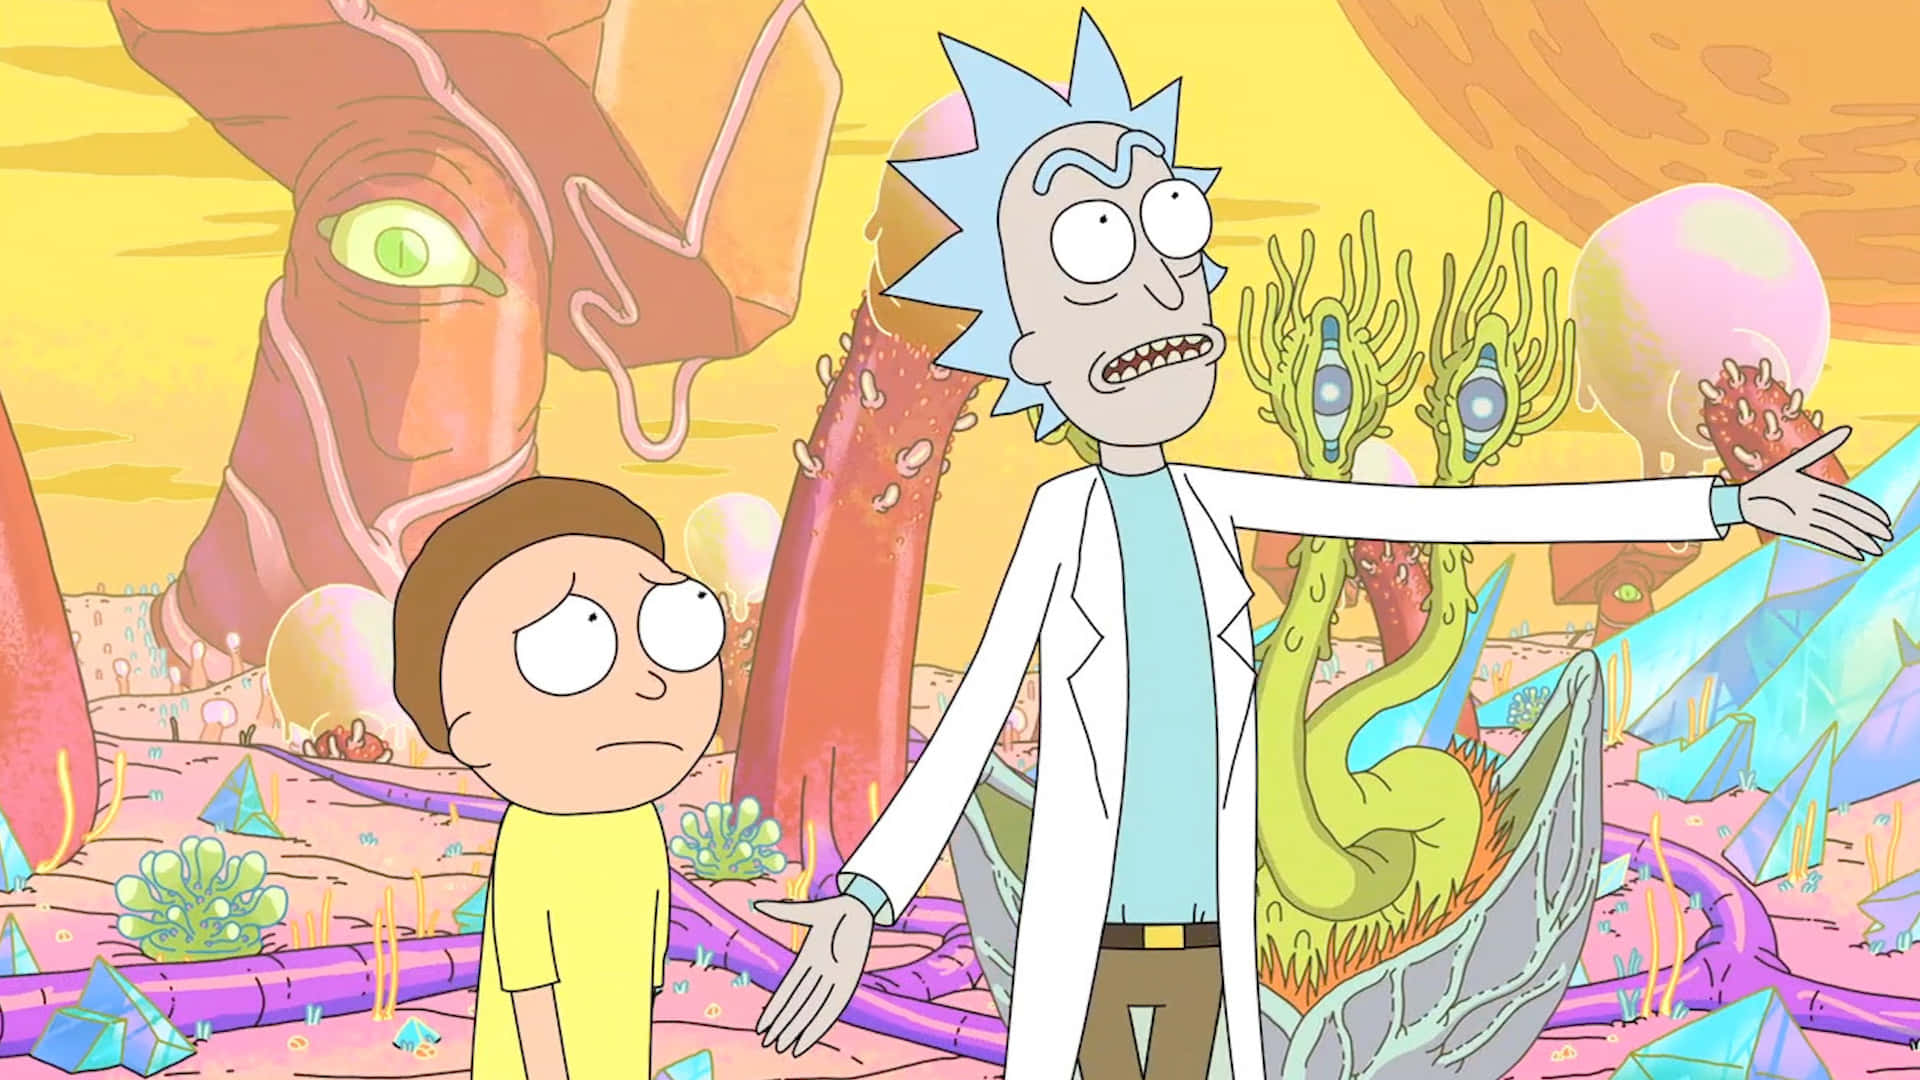 Rick and Morty having a wild time